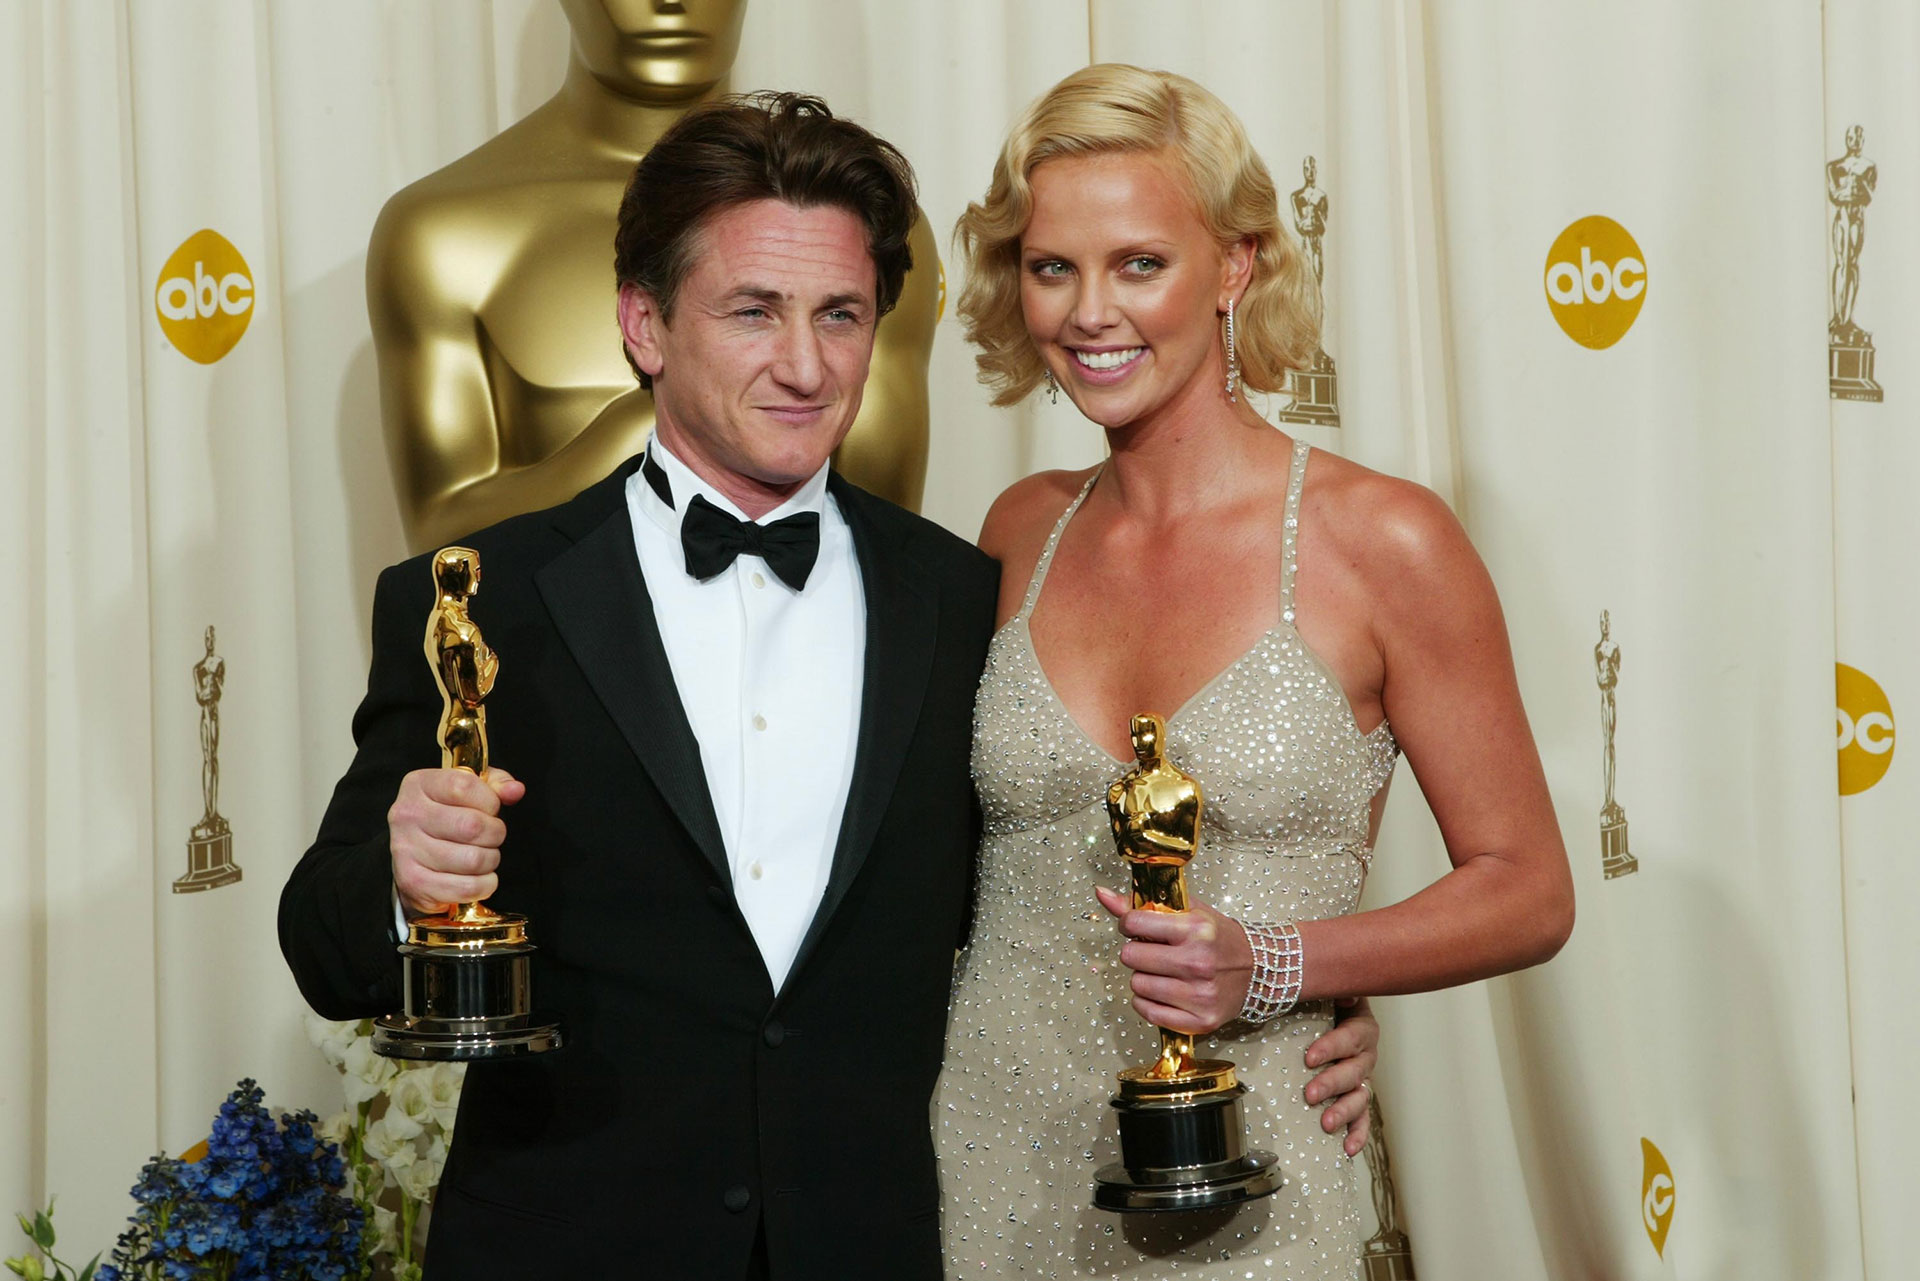 Theron and Penn pose with their Oscars when they were just friends (Getty Images)